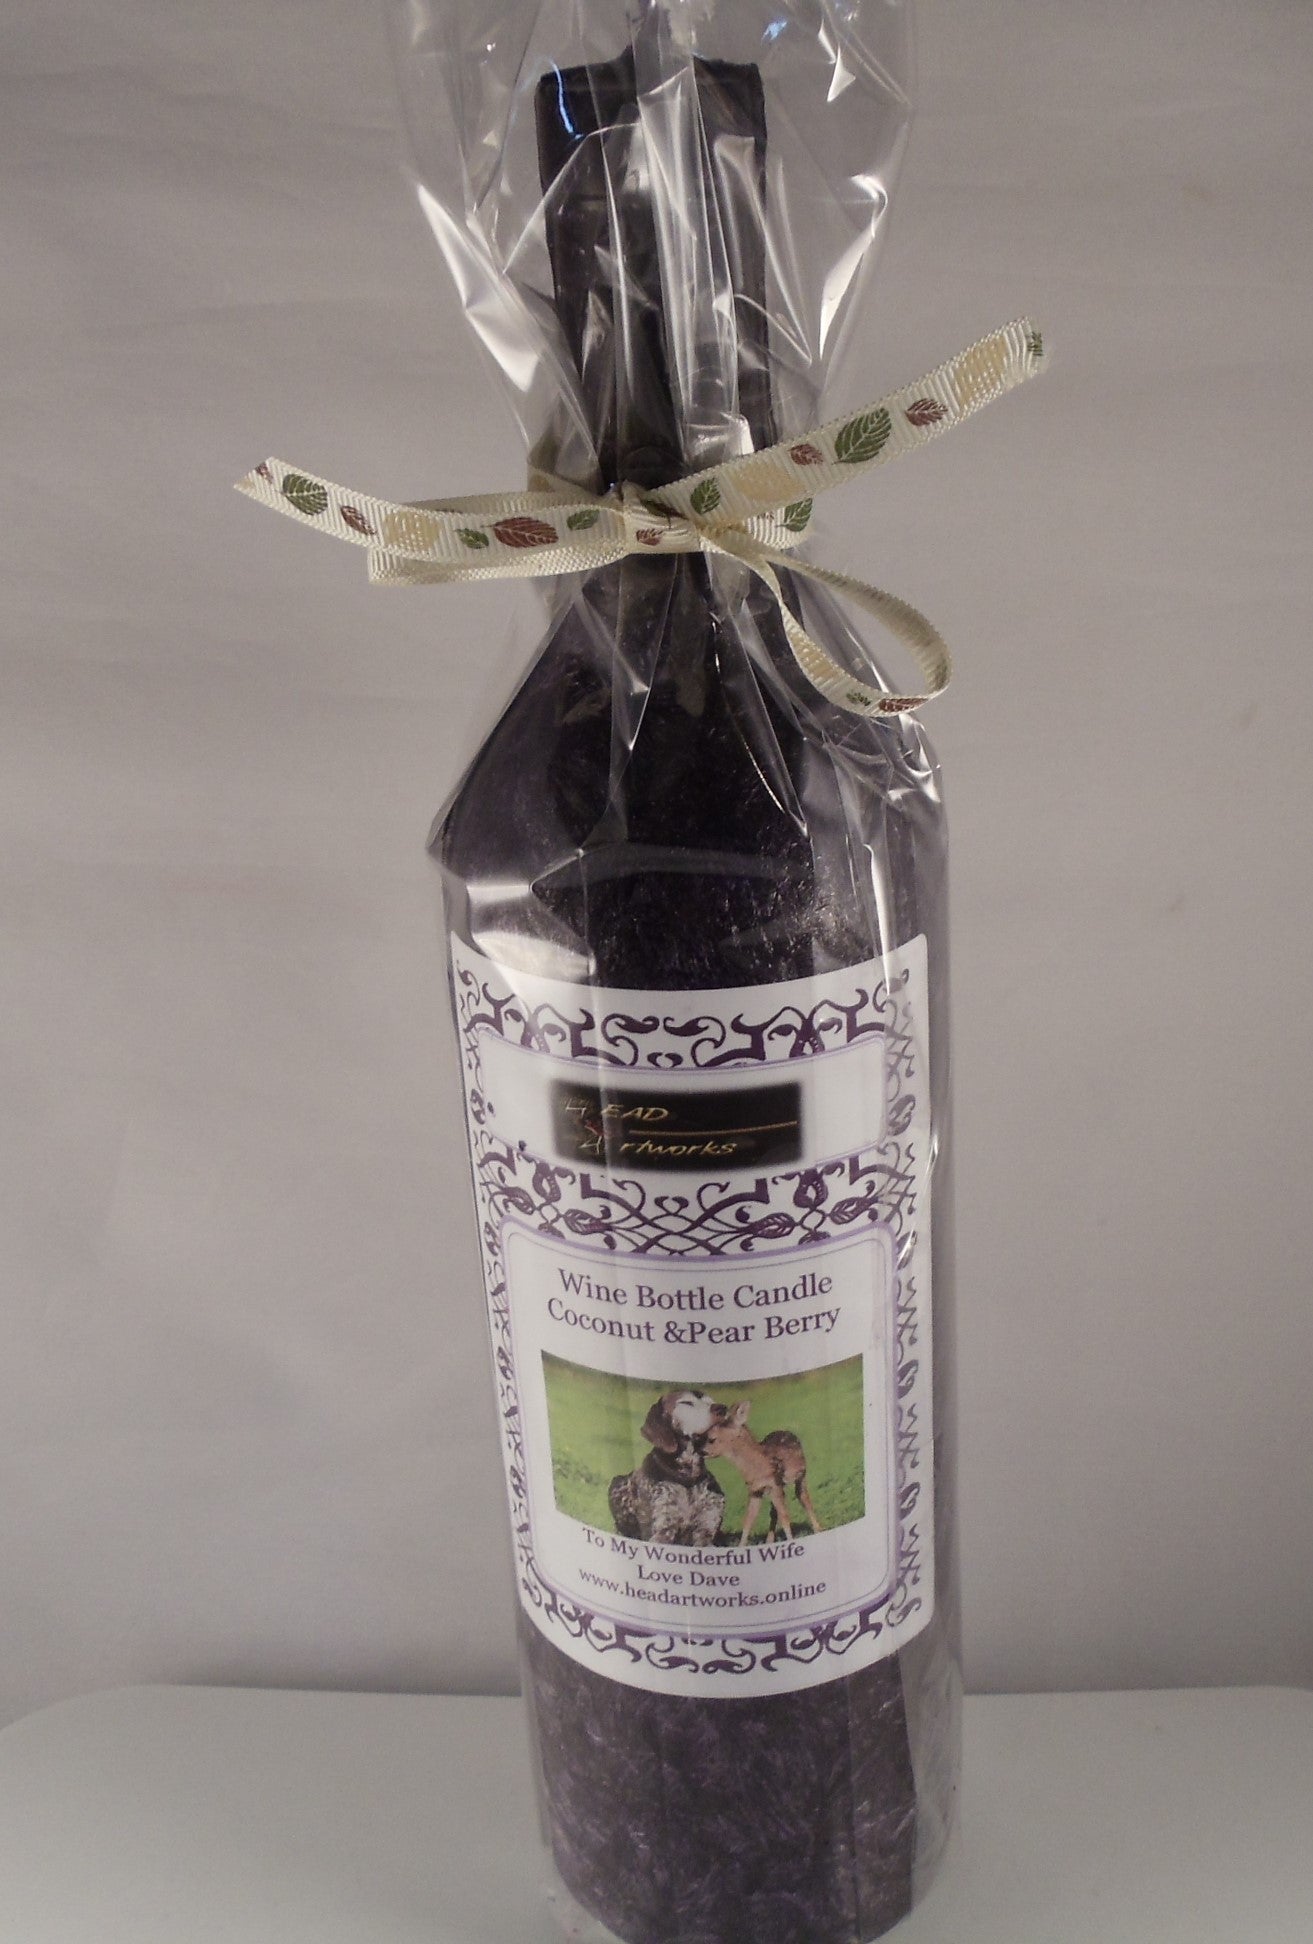 Candle Bottle Centerpiece Coconut & Pearberry- Custom Designed Adorable Scene of Deer & Puppy - Head Art Works